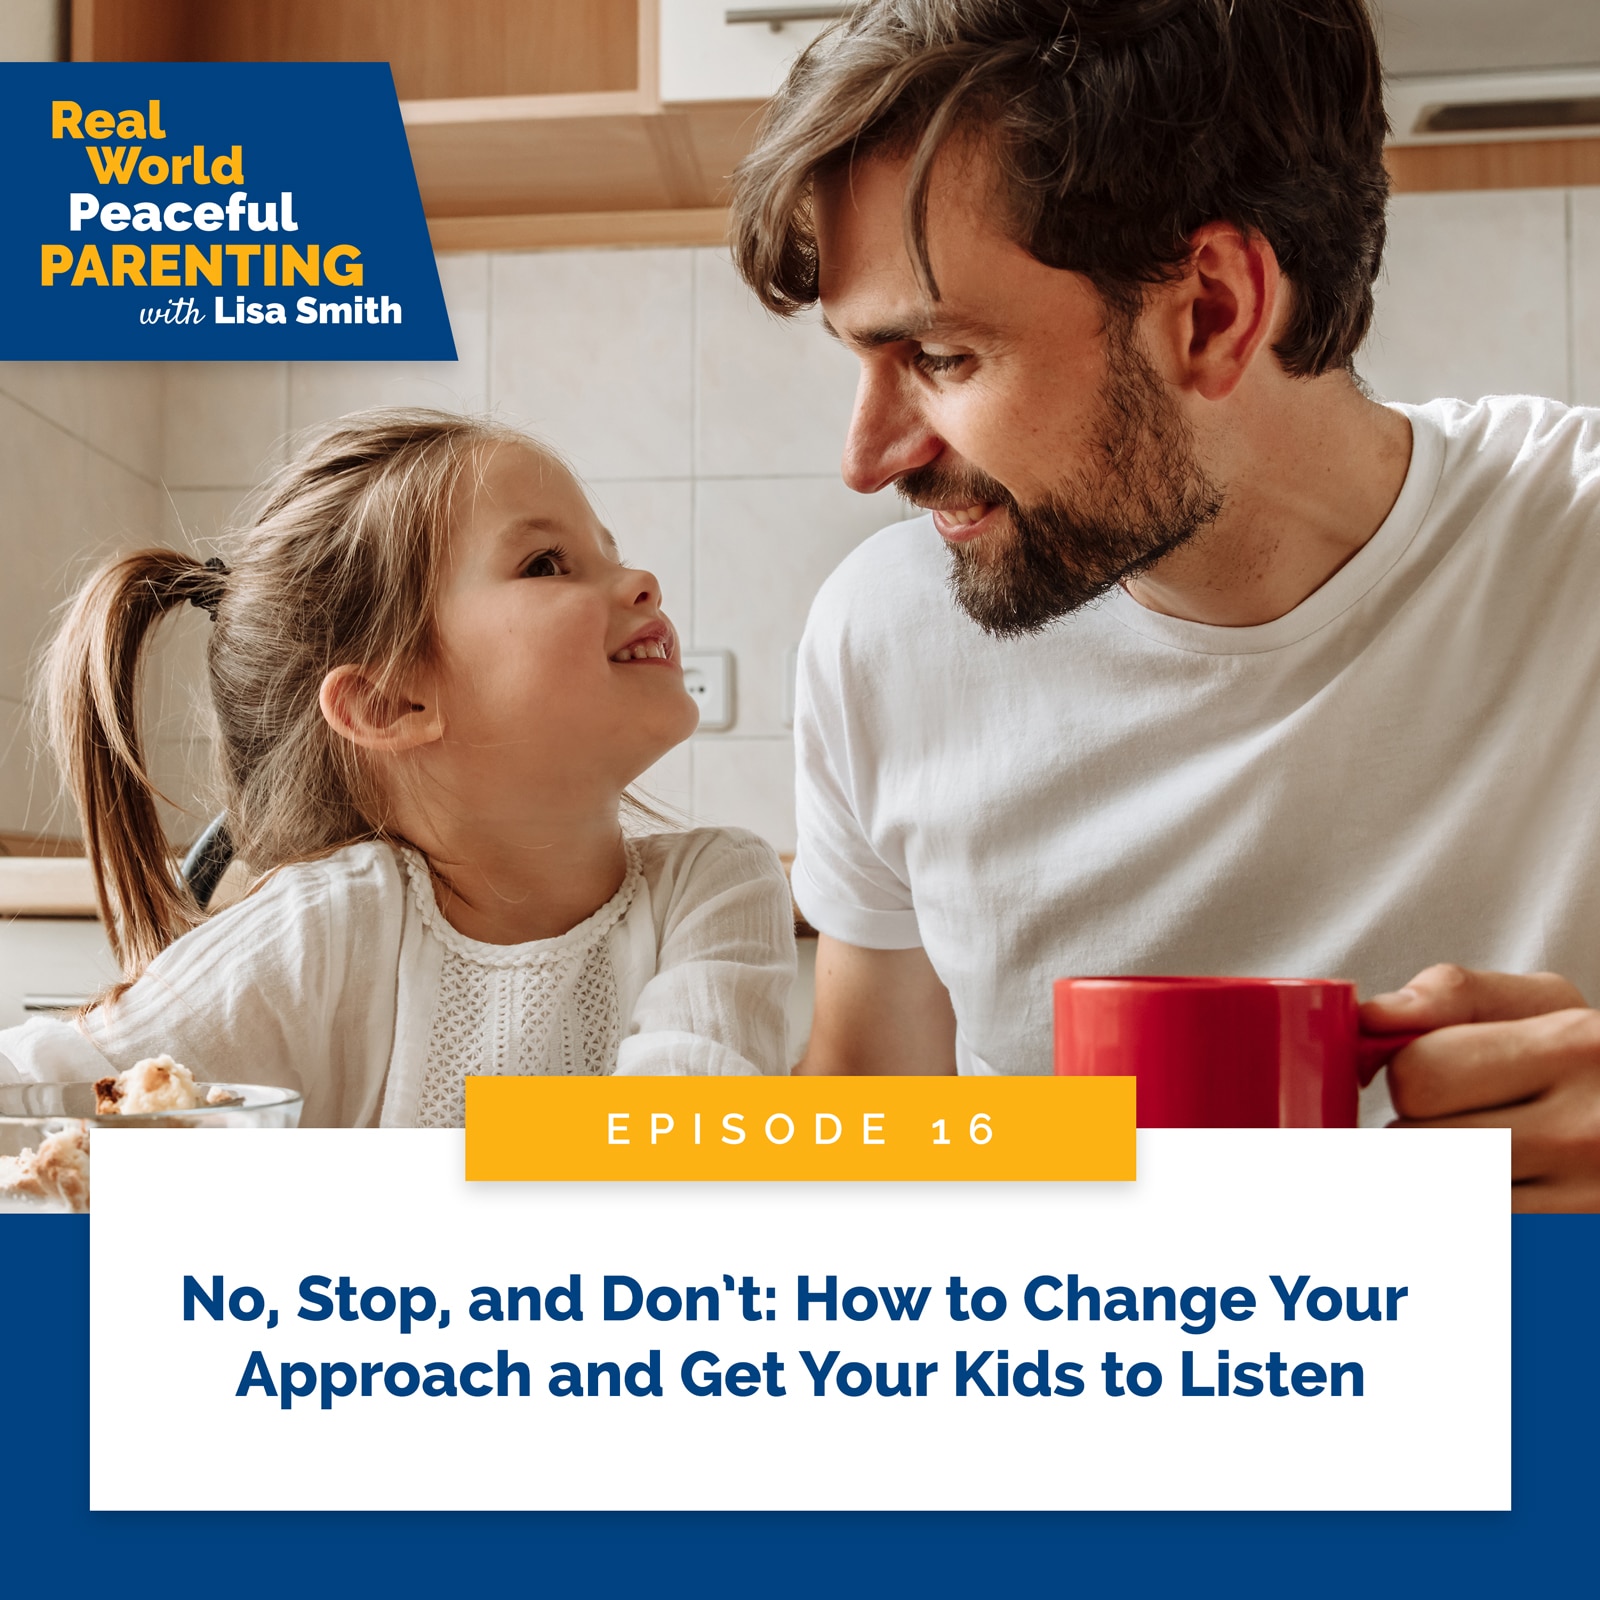 Real World Peaceful Parenting with Lisa Smith | No, Stop, and Don’t: How to Change Your Approach and Get Your Kids to Listen